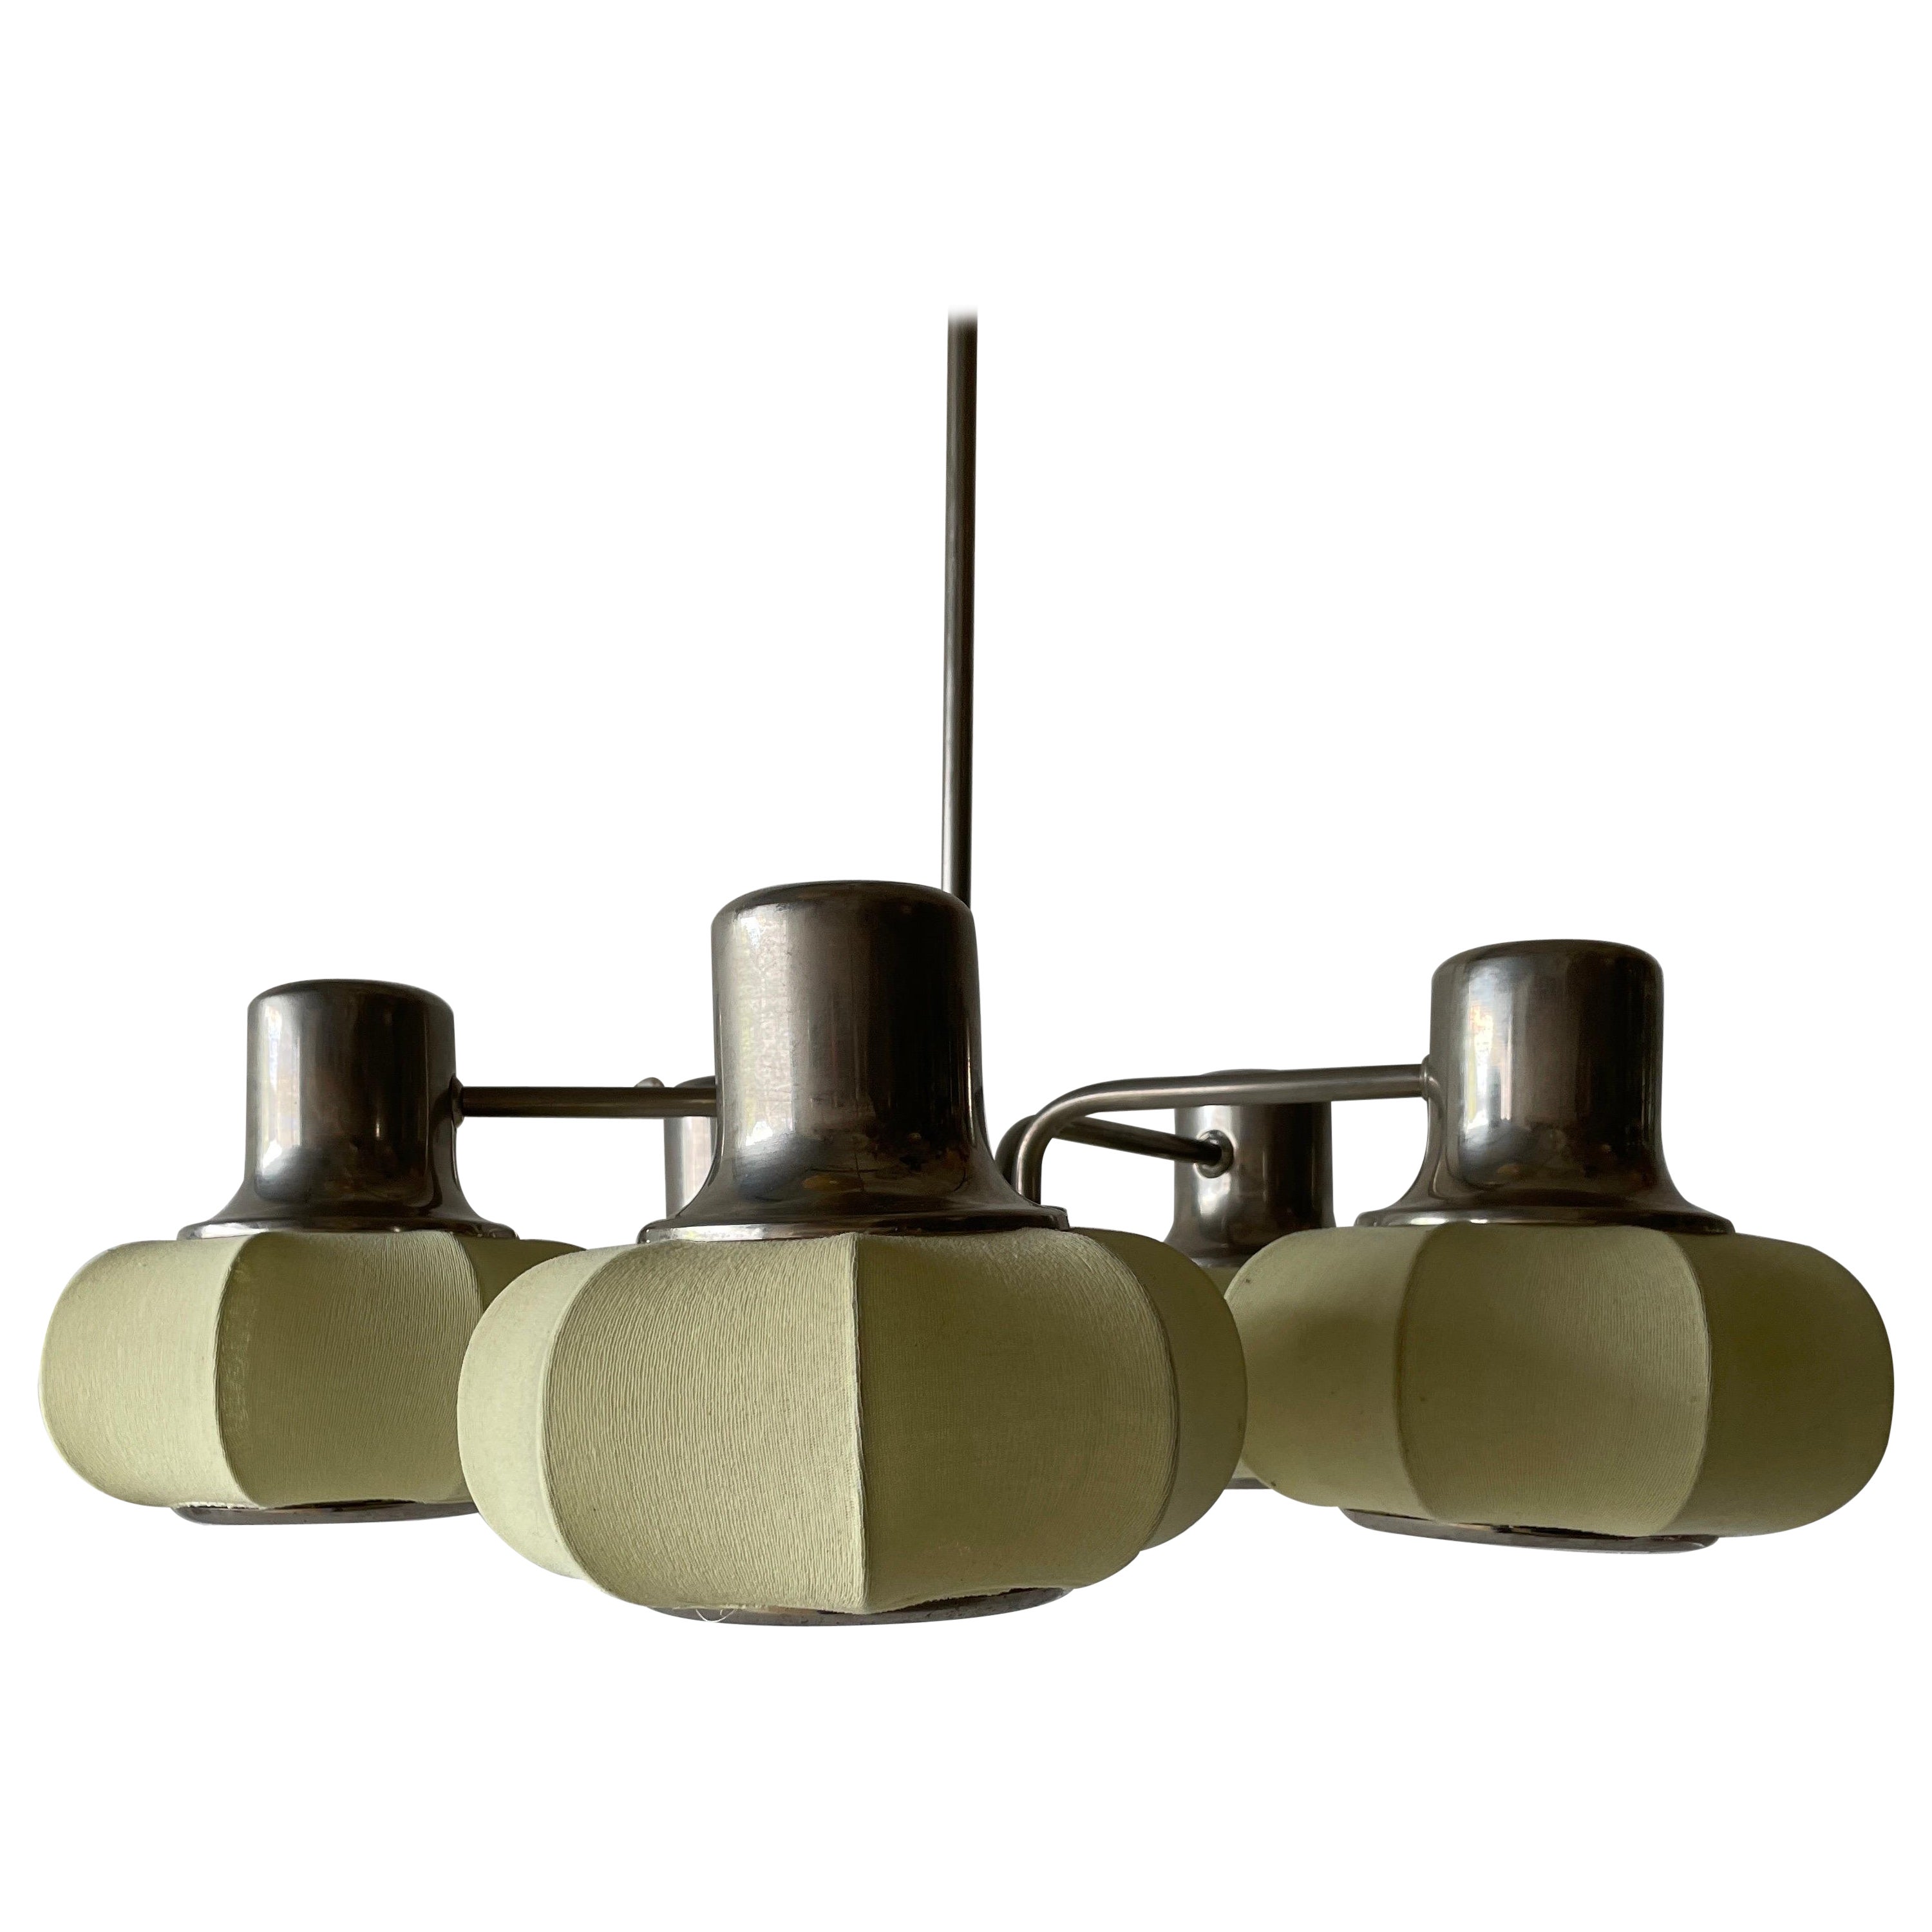 5-armed Metallic Chandelier with Fabric Shades by VEB Leuchten, 1950s, Germany For Sale